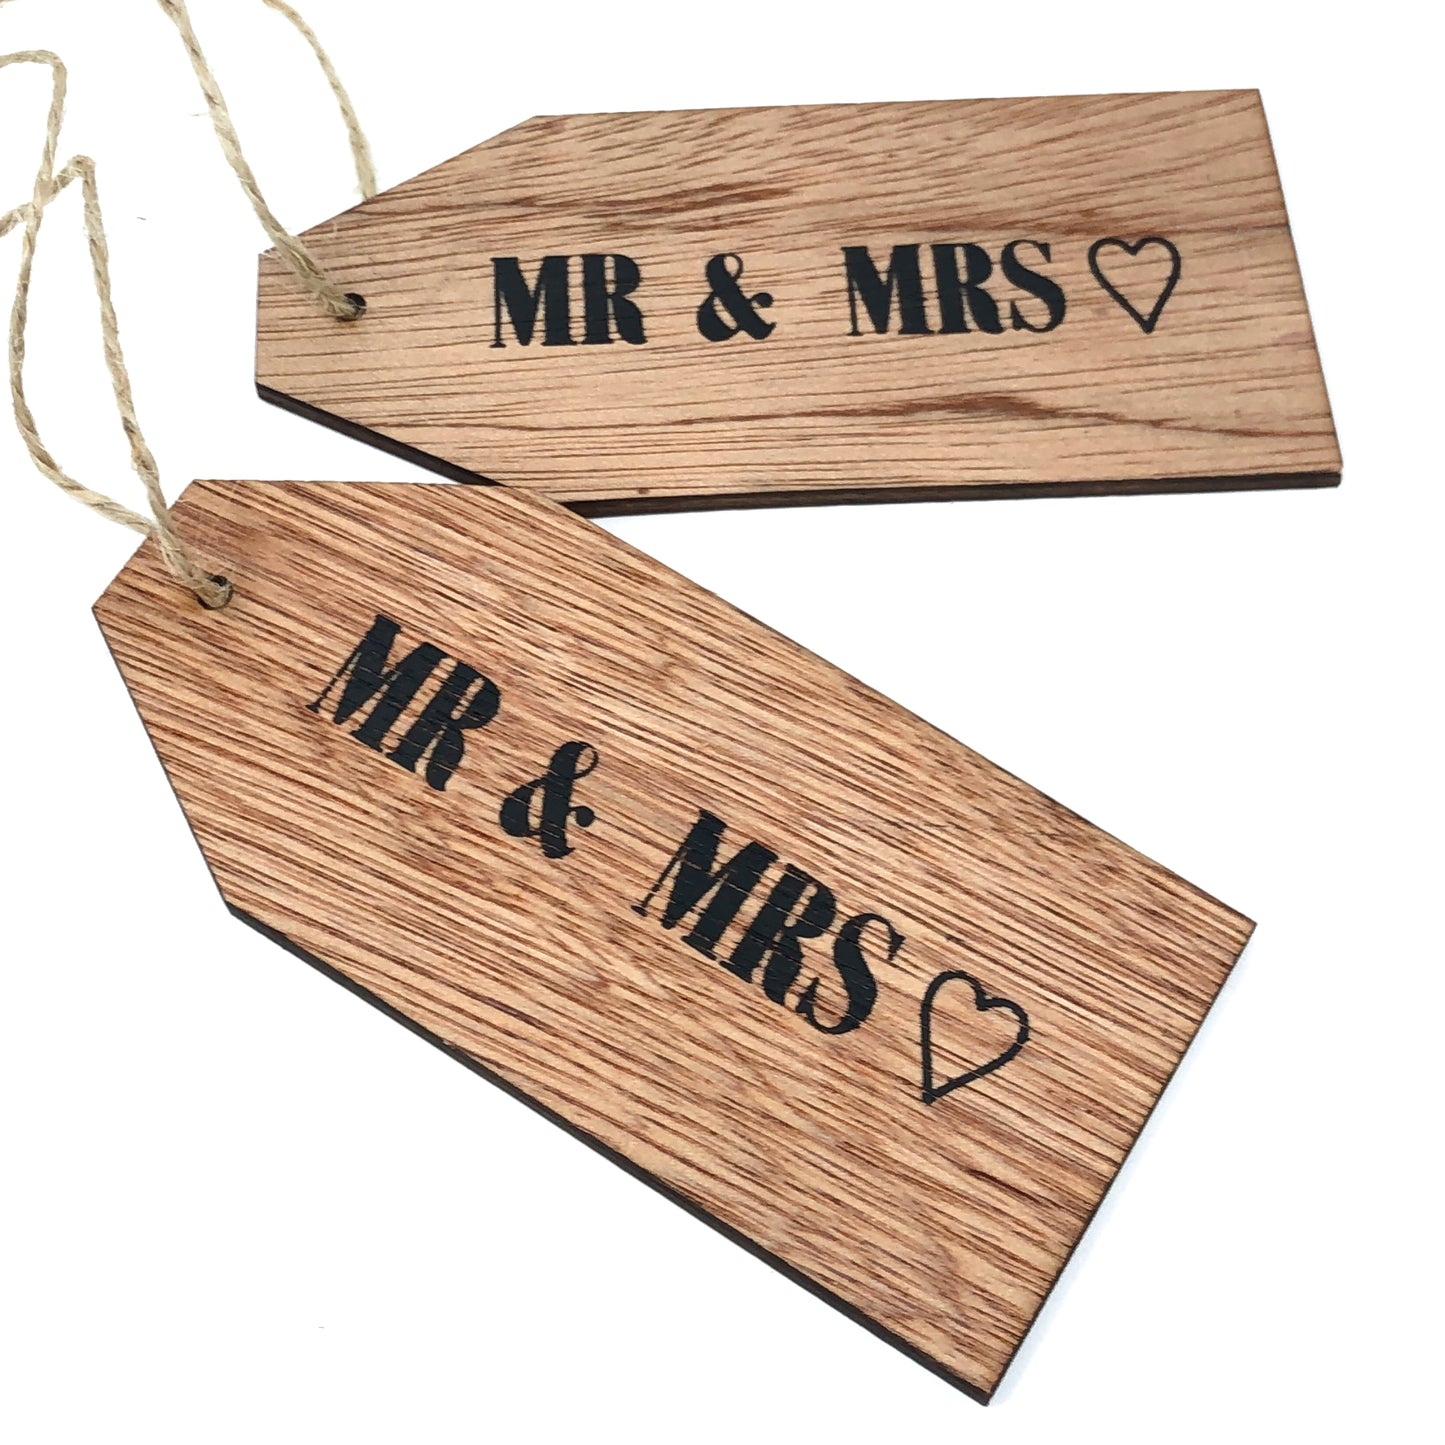 Mr & Mrs Wooden Wedding Tags